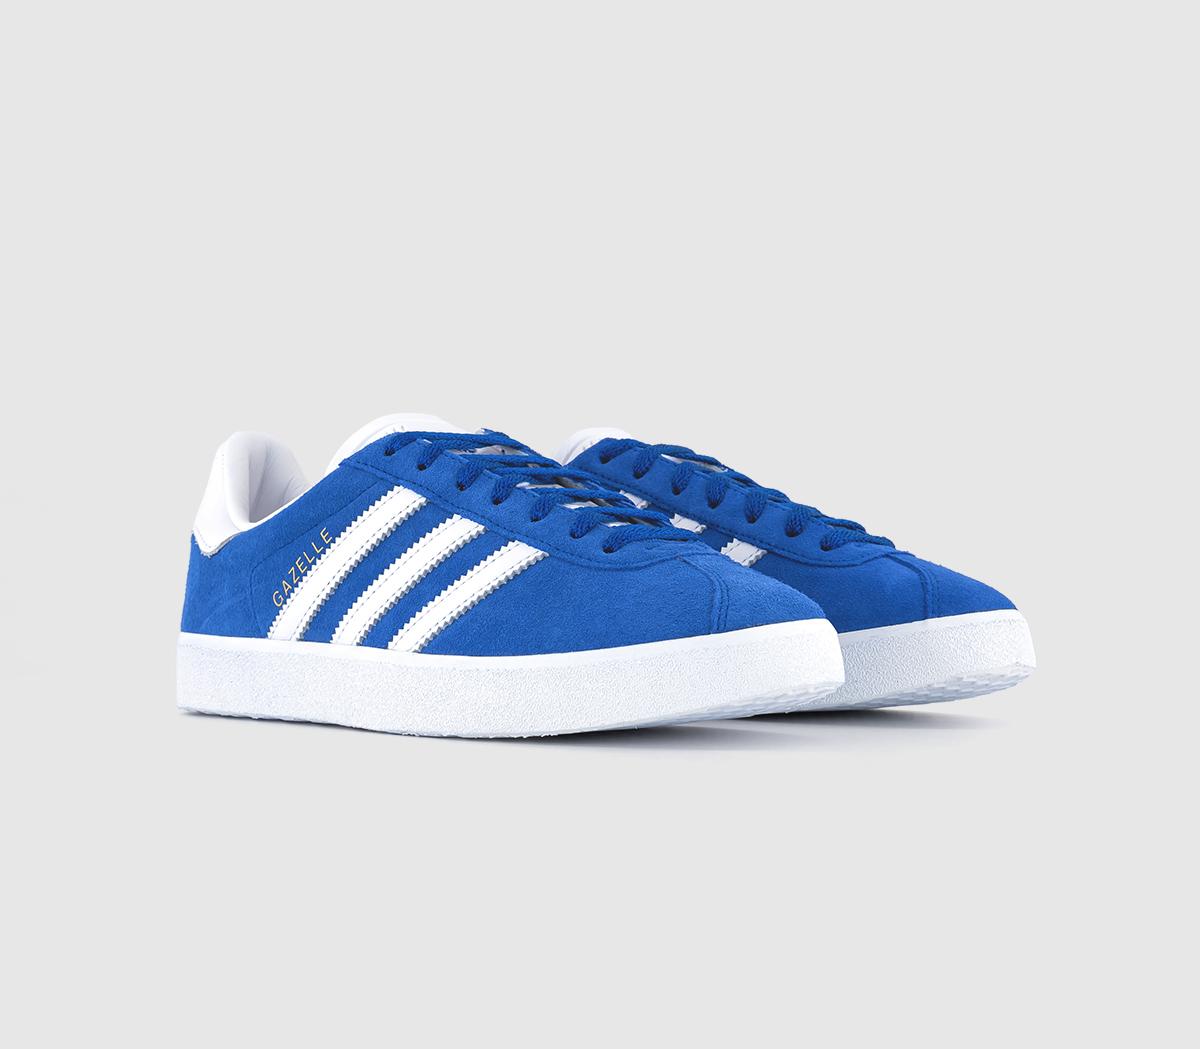 Adidas Womens Gazelle 85 Trainers Royal Blue White Gold Met, 9